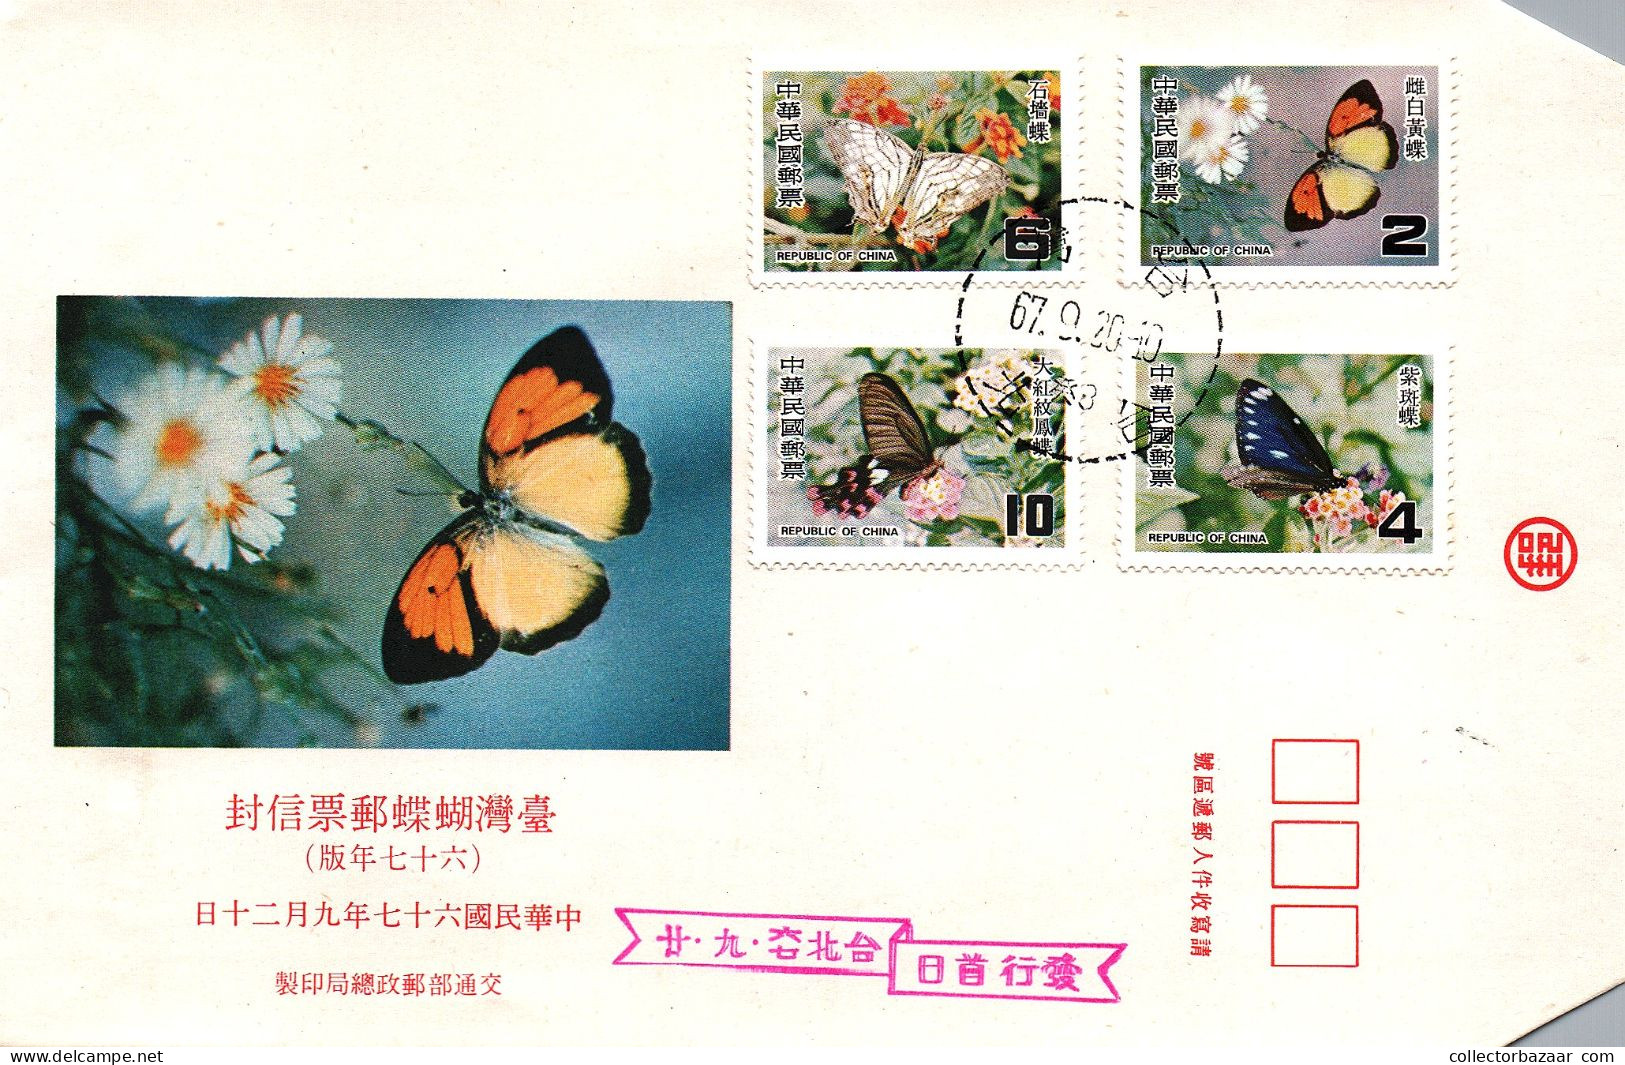 Taiwan Formosa Republic Of China FDC Butterflies Colourful Insects Wildlife  - 10$, 6$, 4$ And 2$ Stamps - FDC